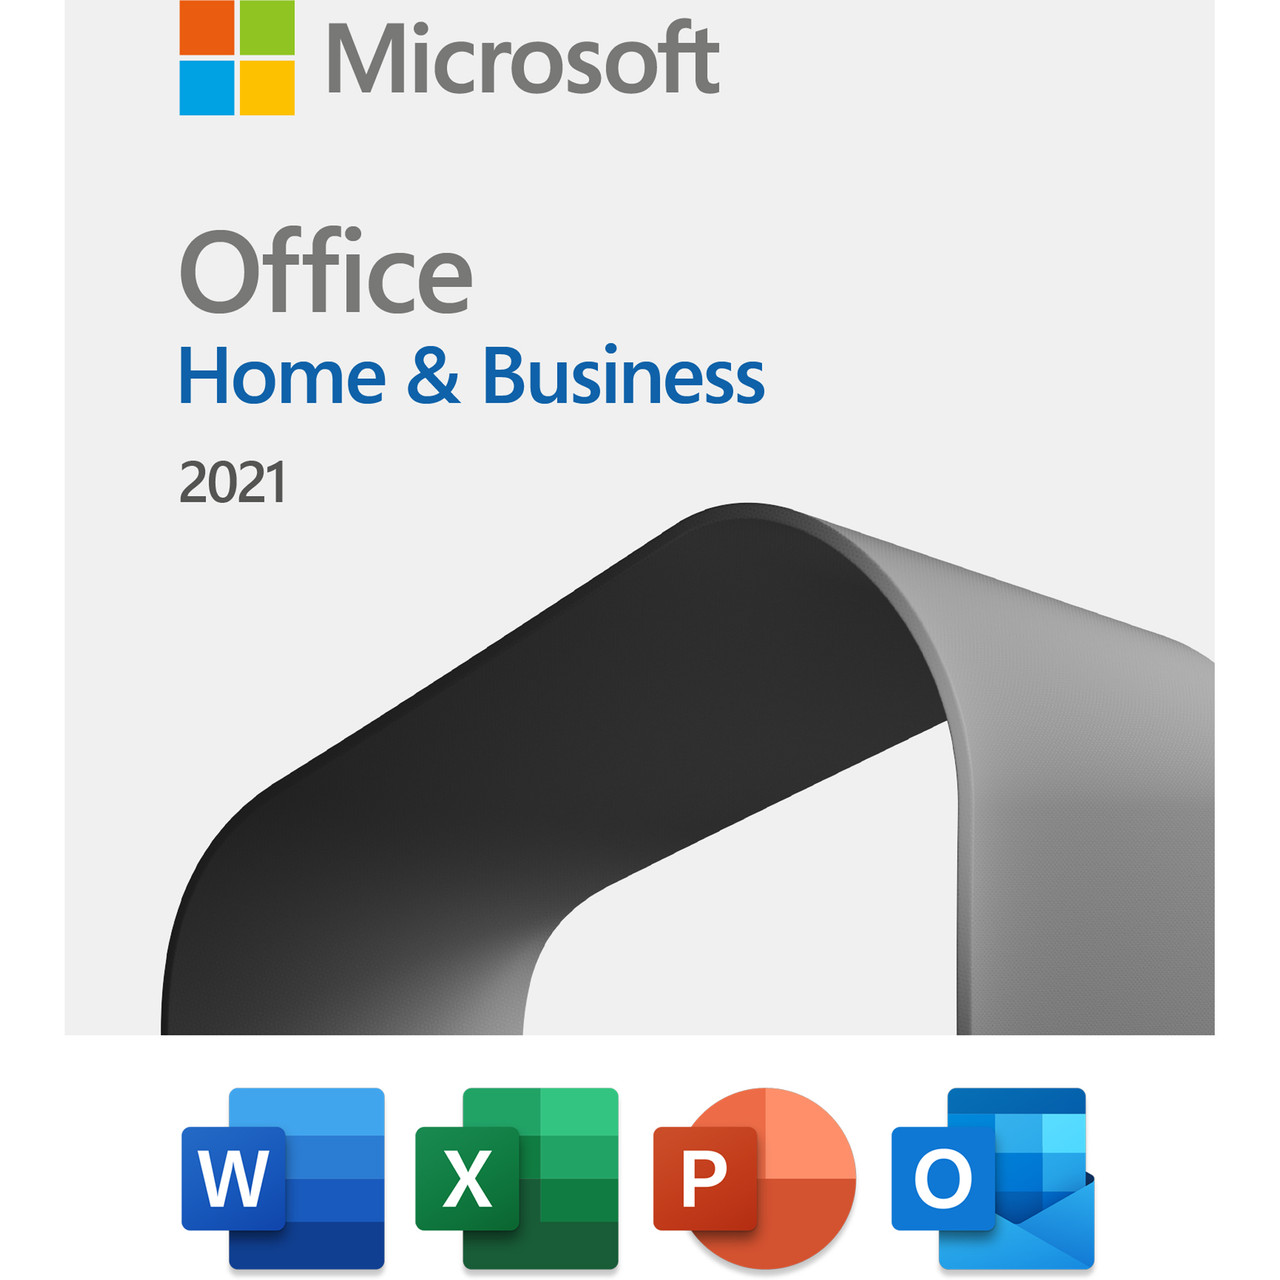 Microsoft Office Home & Business 2021 ,One Time Purchase, 1 Device